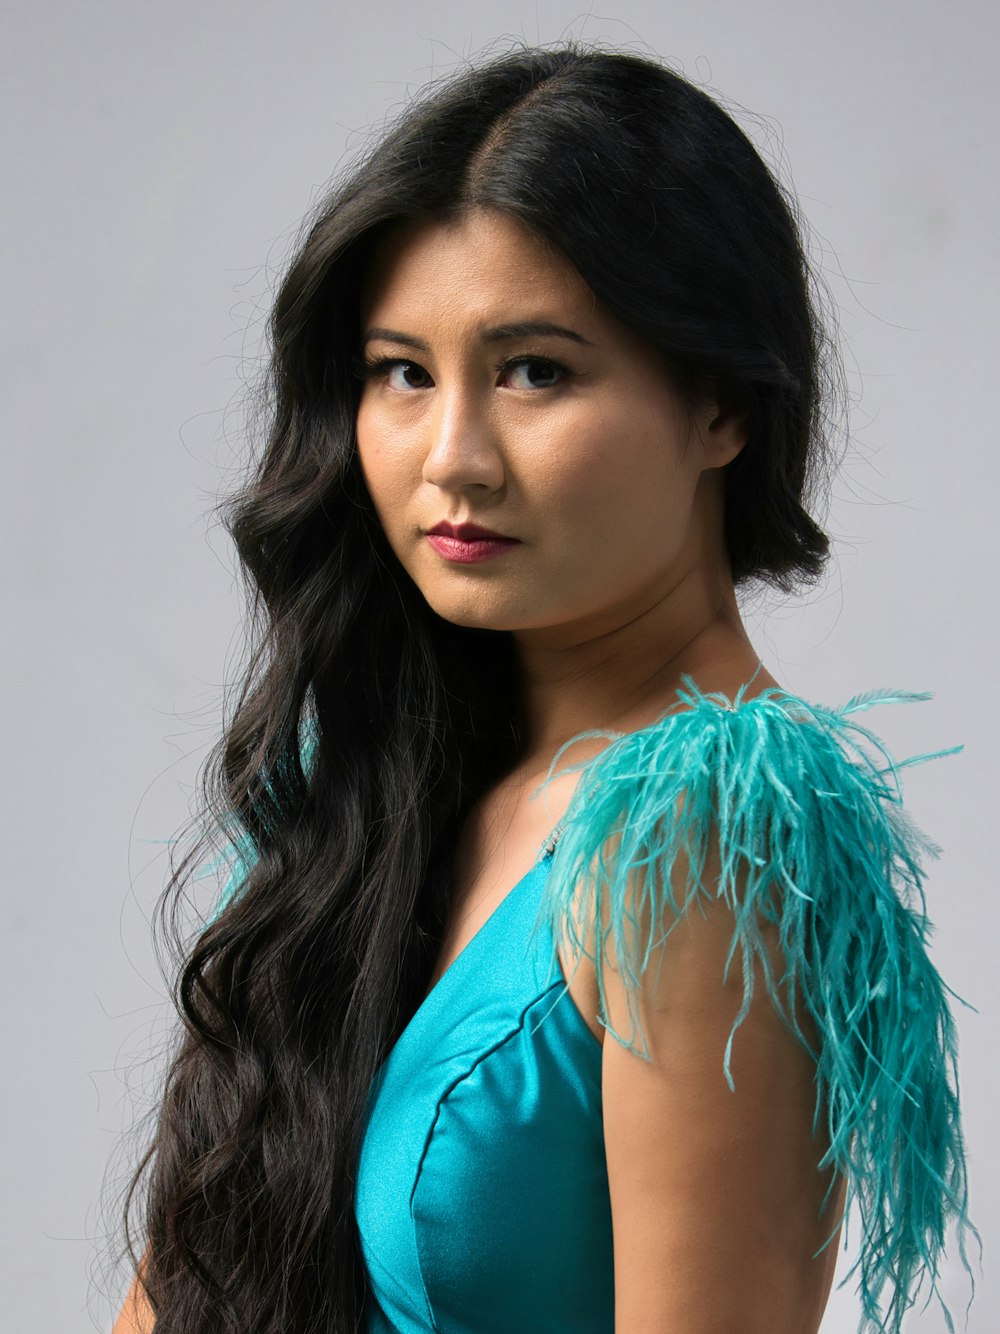 a woman with long black hair wearing a blue dress